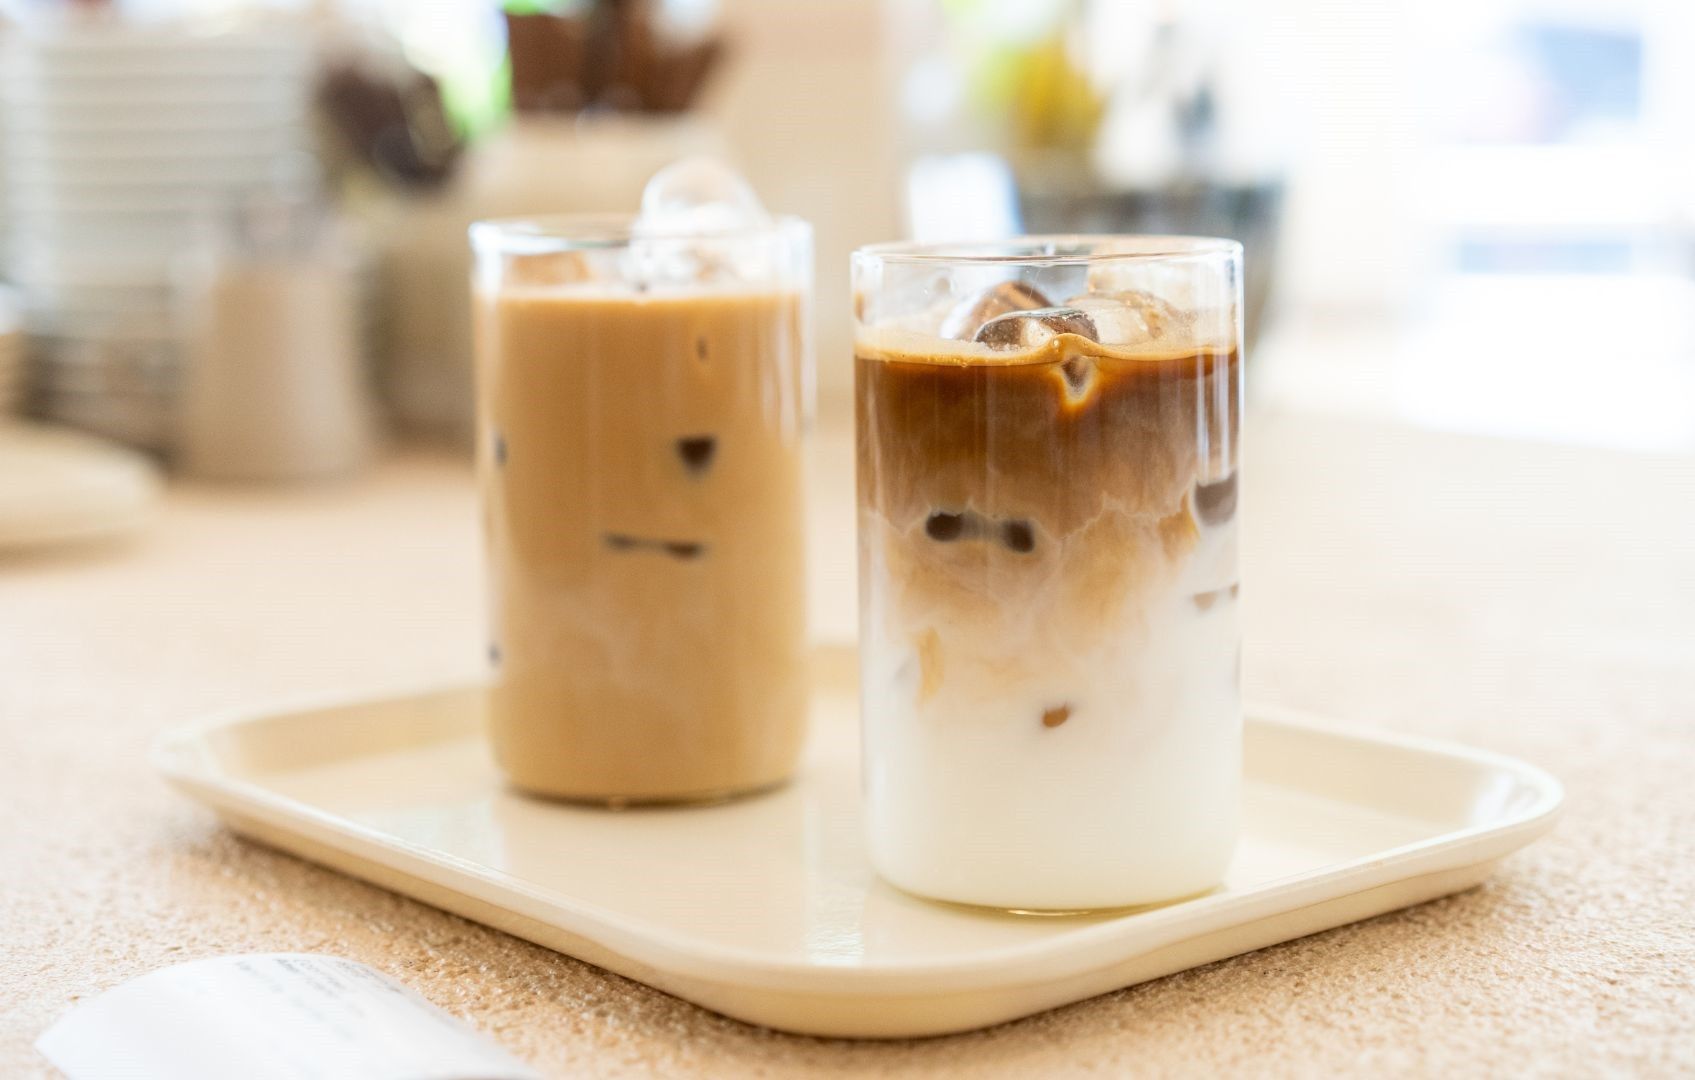 Iced coffee is Filipinos’ favorite coffee beverage — data